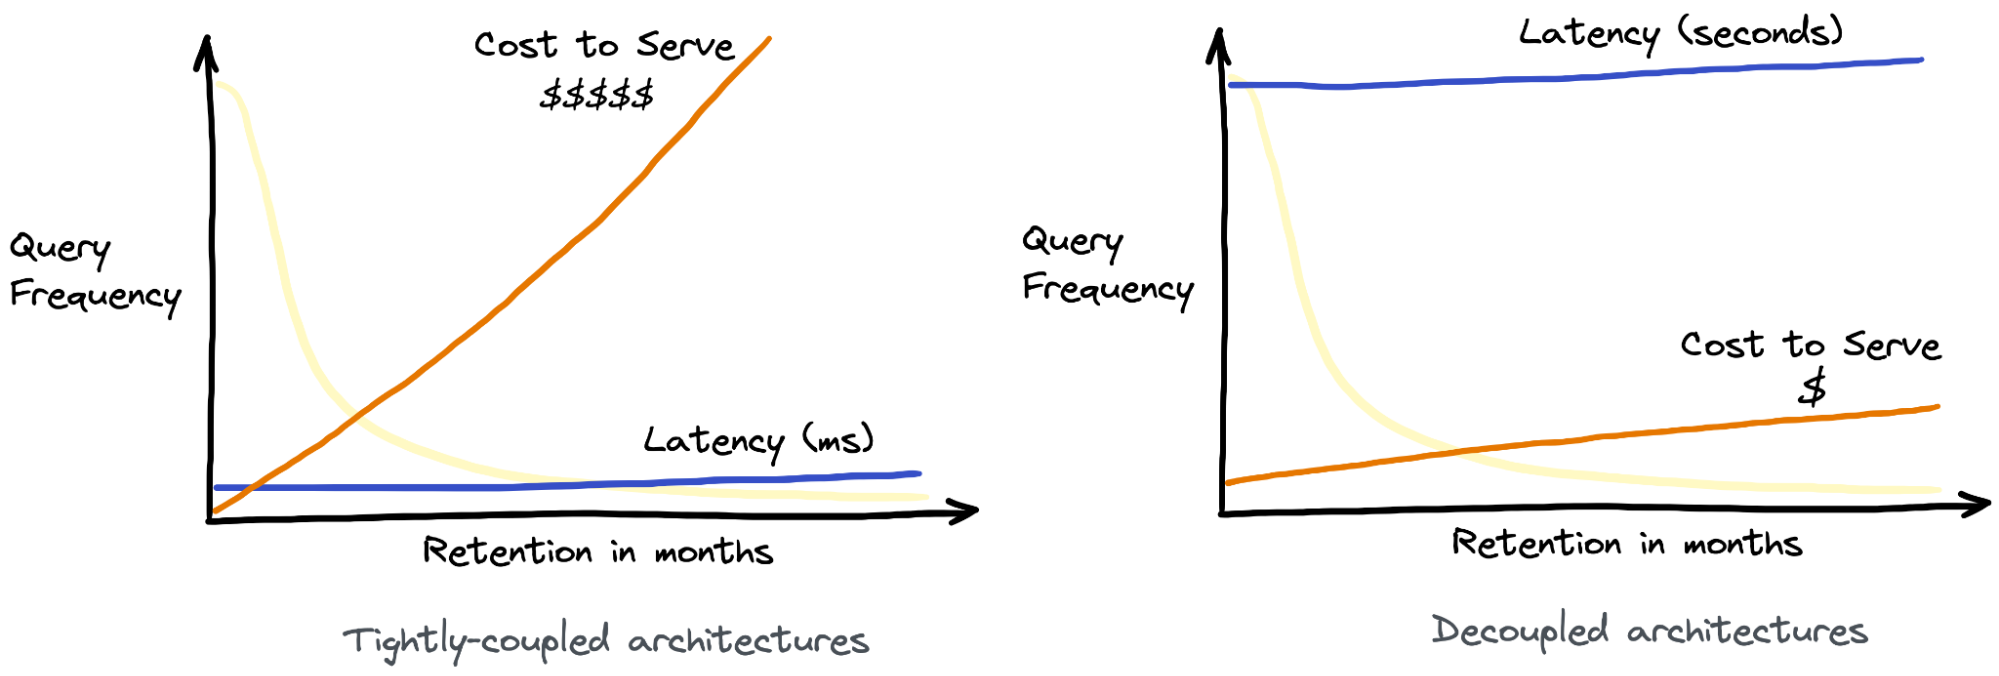 Cost vs latency tradeoff in real-time analytics systems with storage & compute tightly-coupled (L) vs decoupled (R)